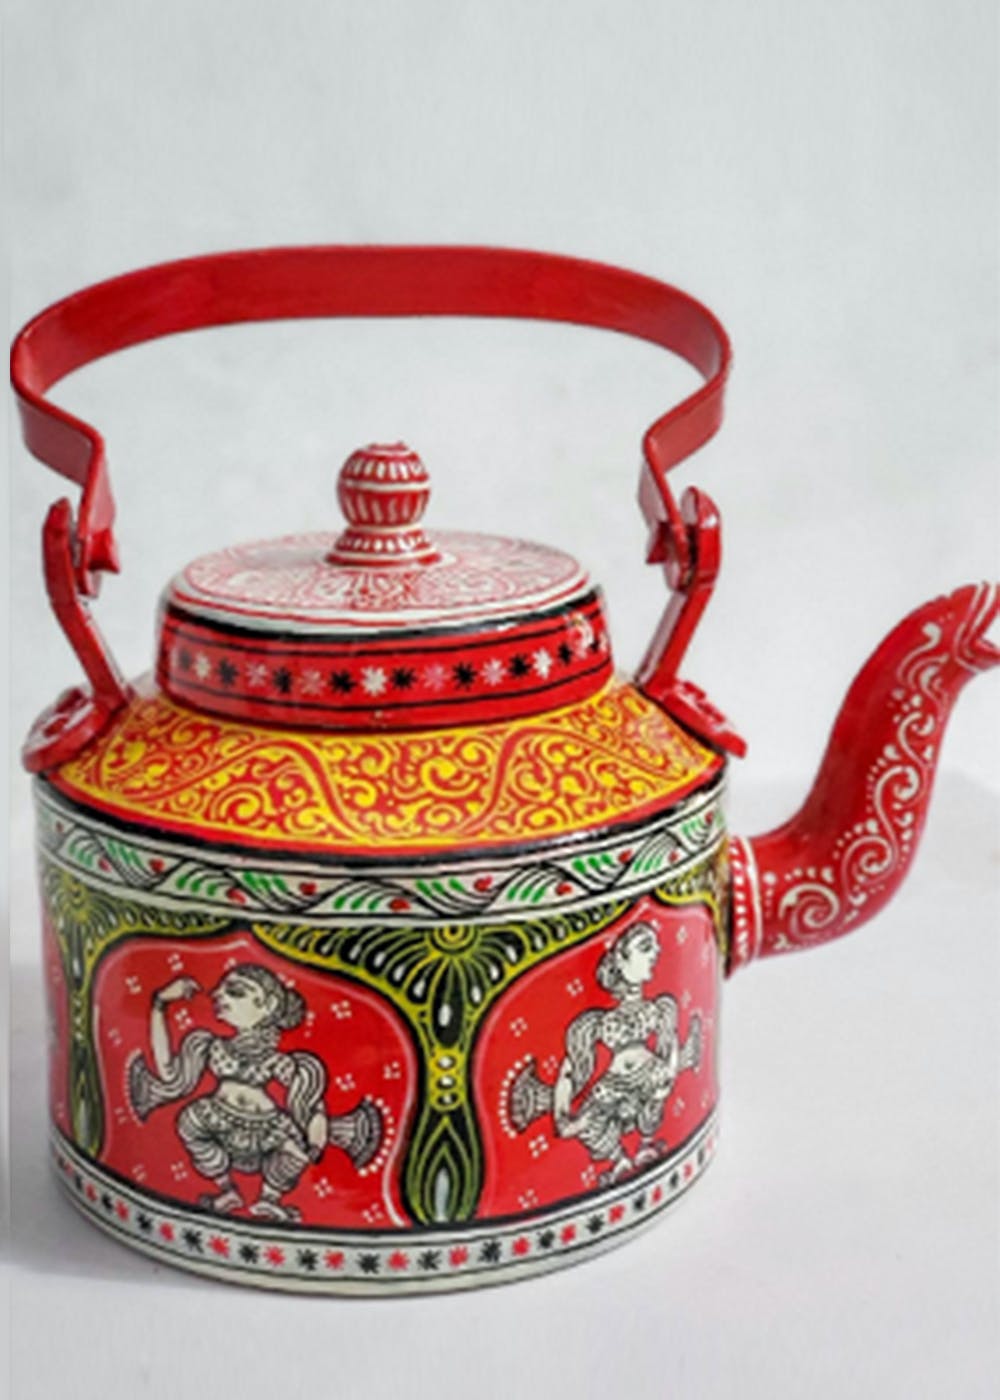 Get Red and White Glossy Pattachitra Kettle at ₹ 1800 | LBB Shop